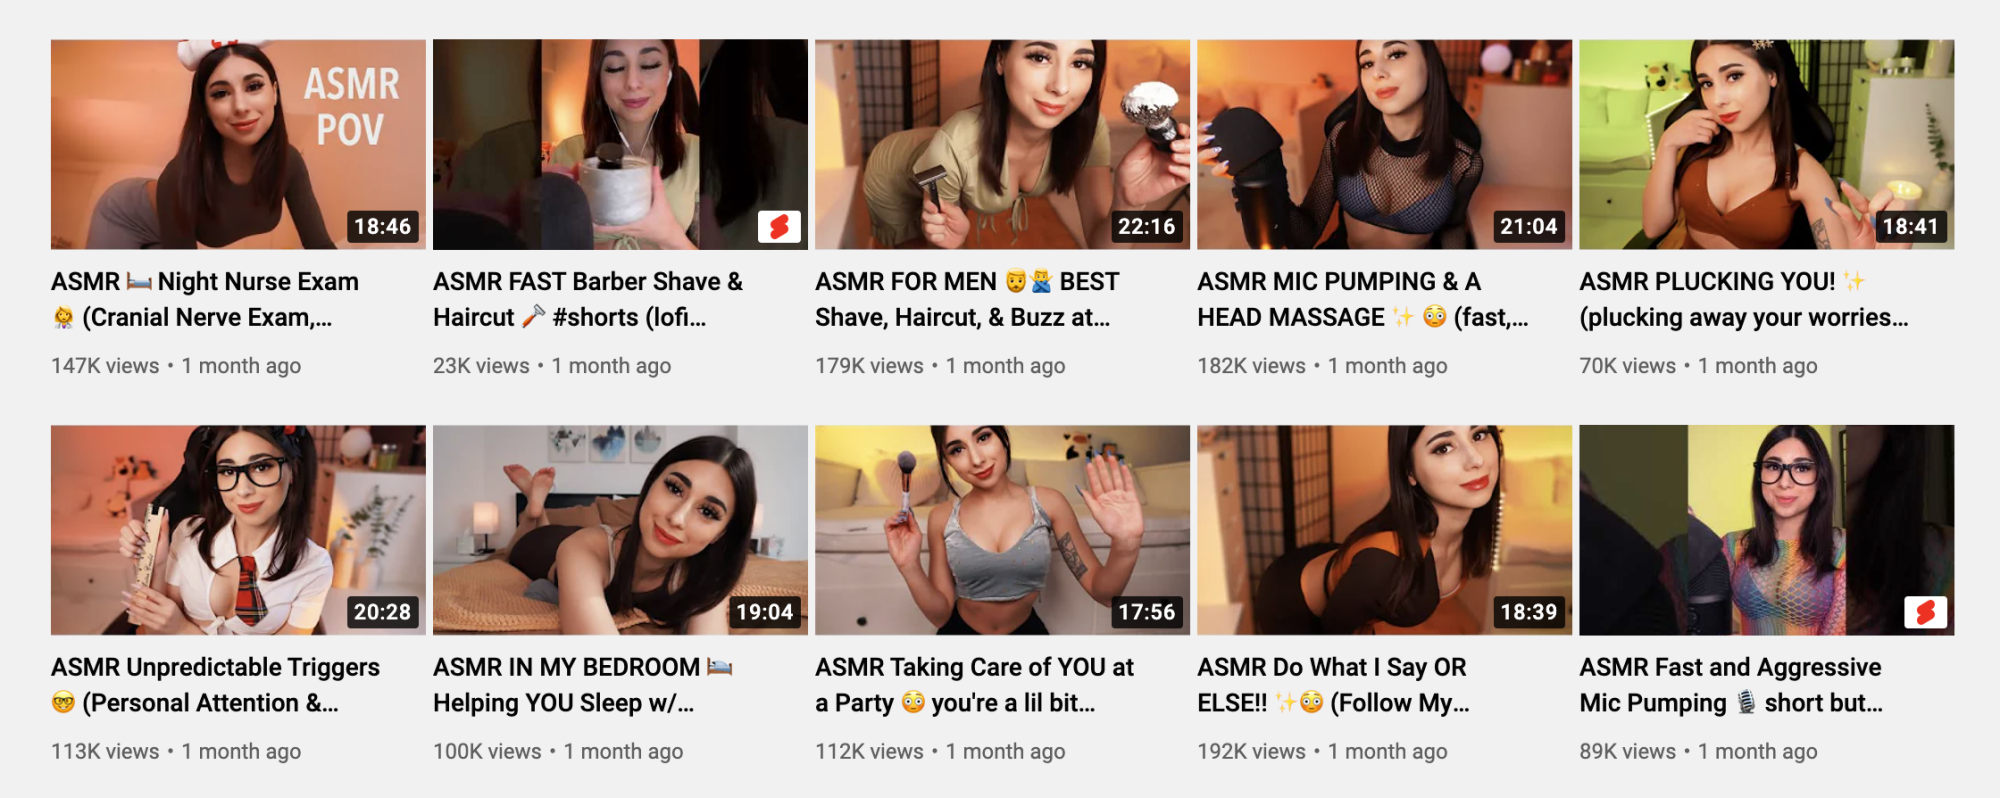 Thumbnails from LunaRexx's ASMR channel including titles like "ASMR FAST Barber Shave and Haircut."